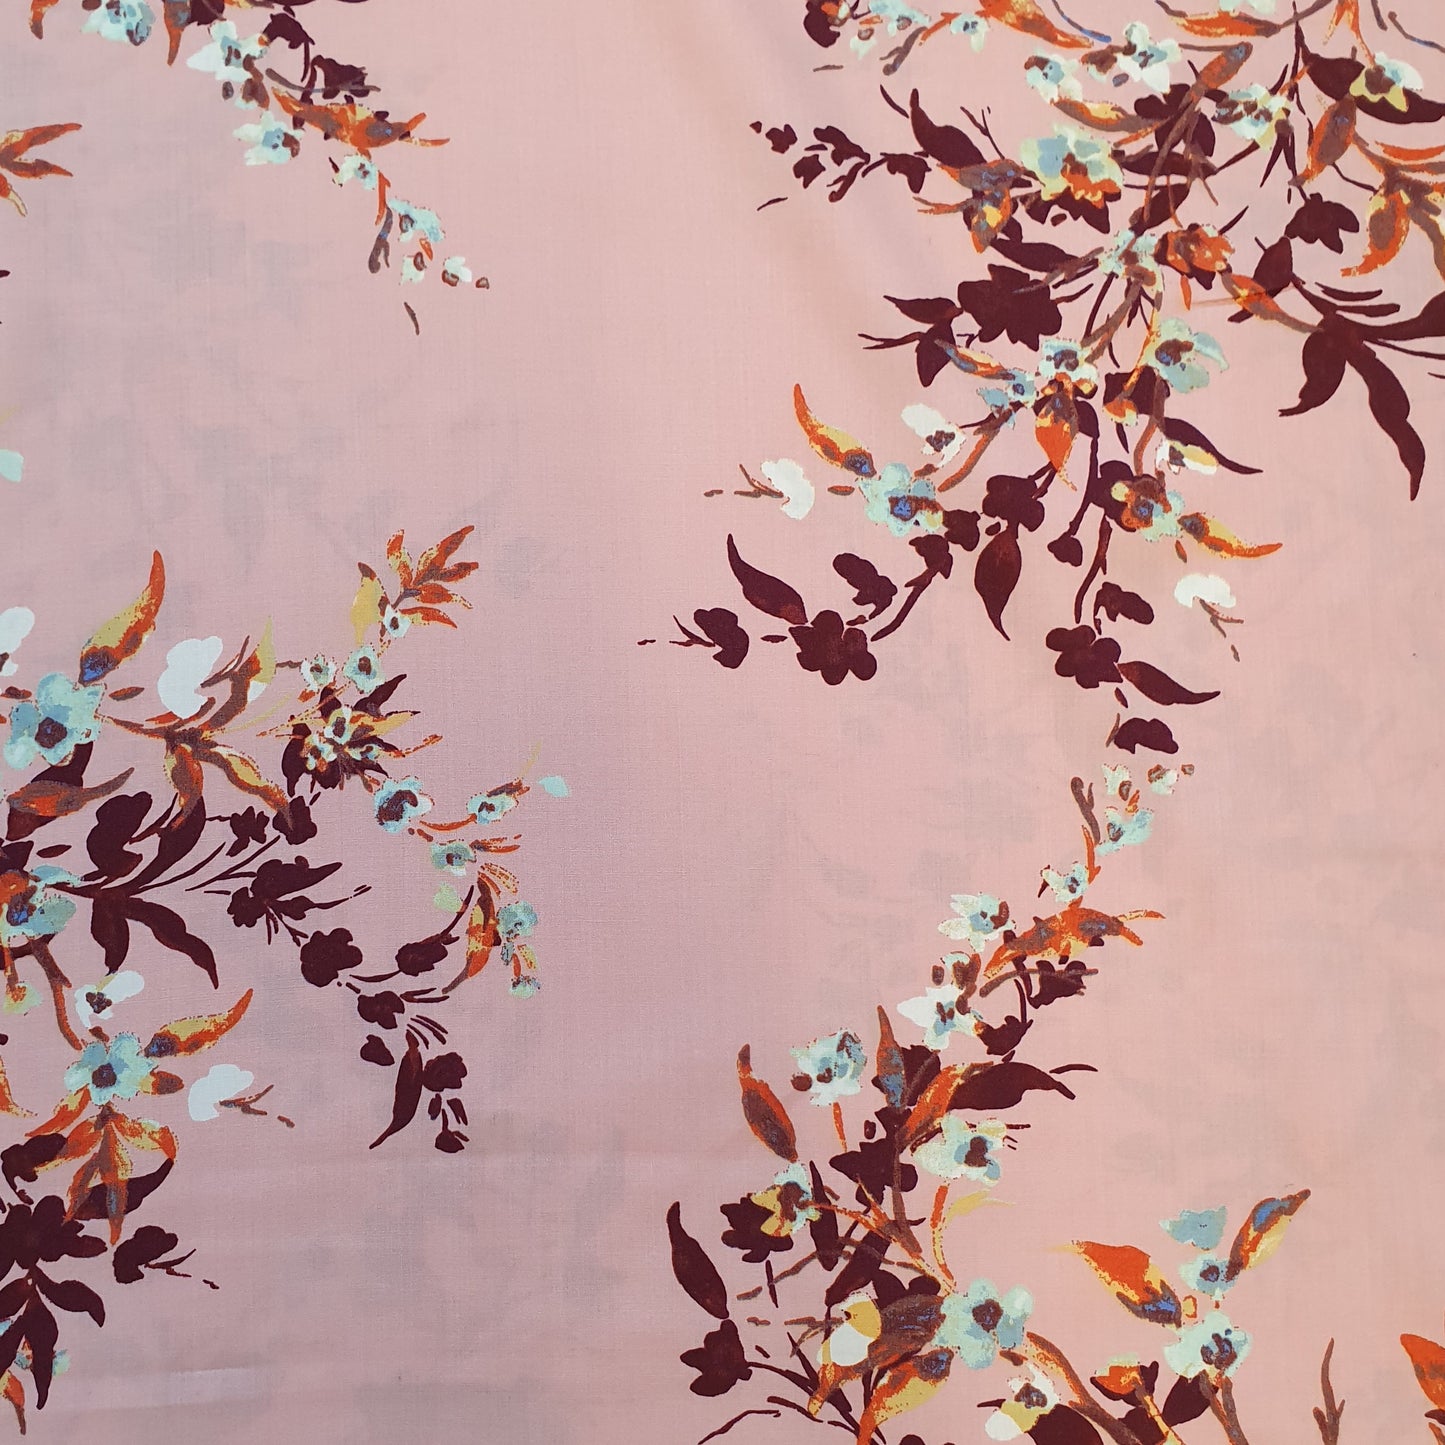 Floral Print on Pink Viscose Fabric.